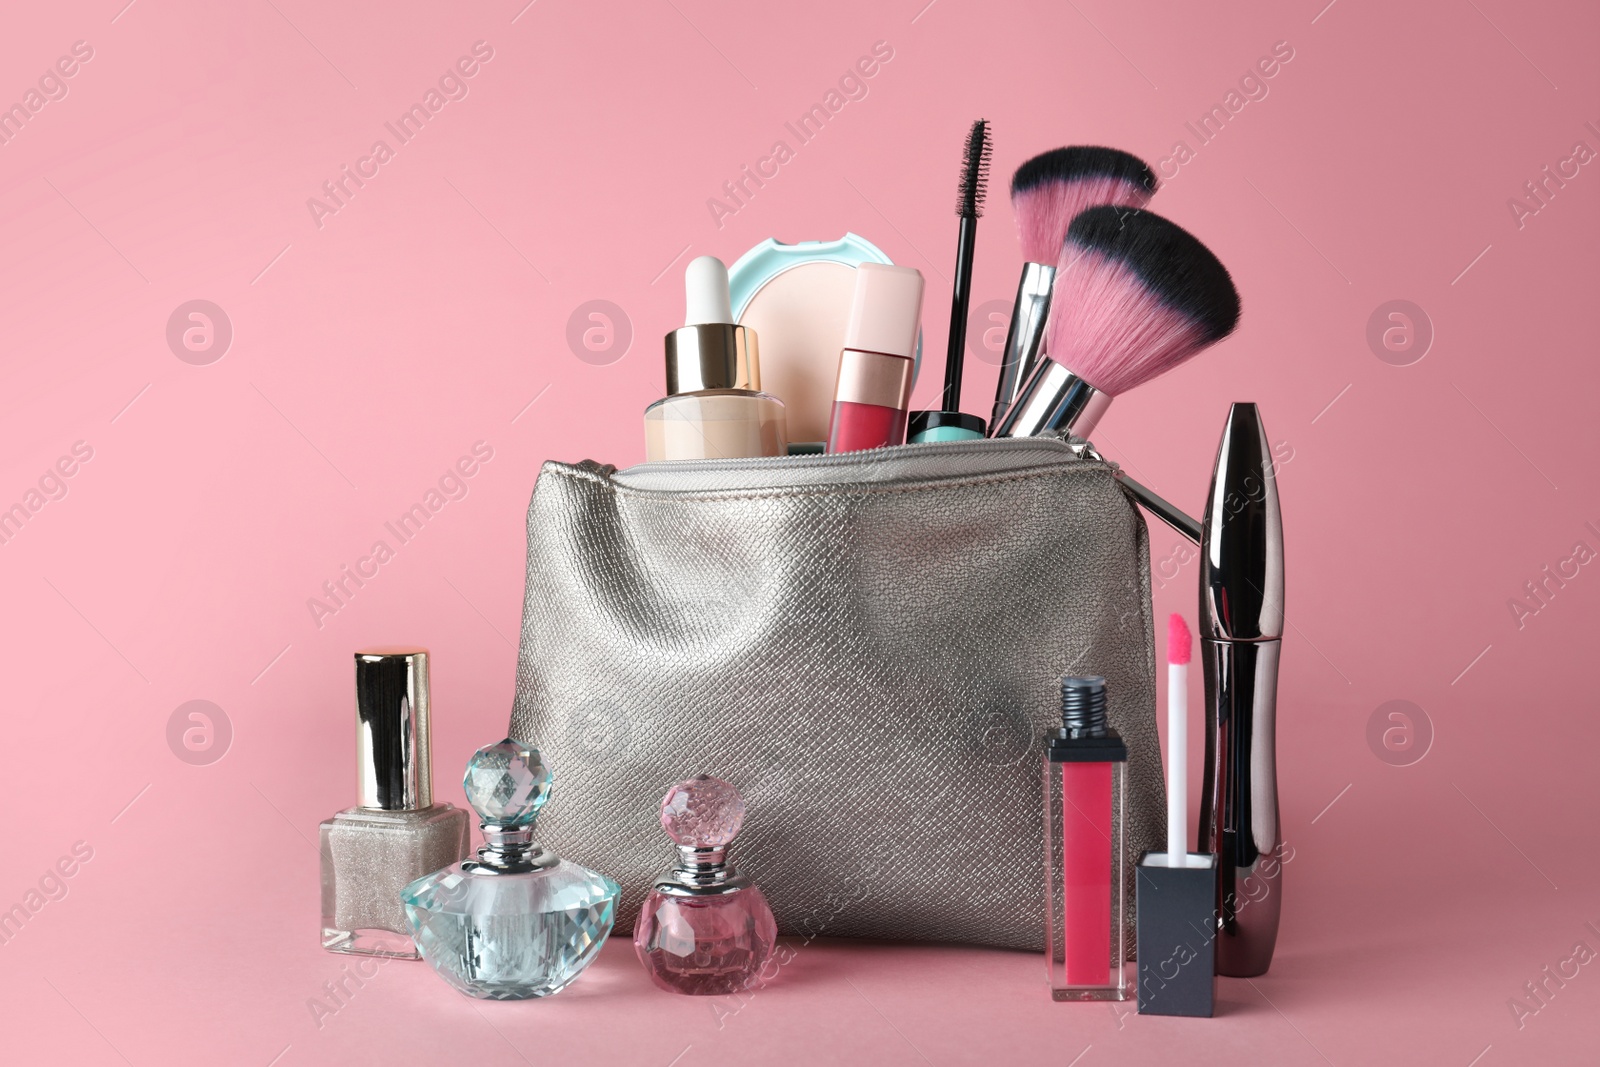 Photo of Cosmetic bag and makeup products with accessories on pink background